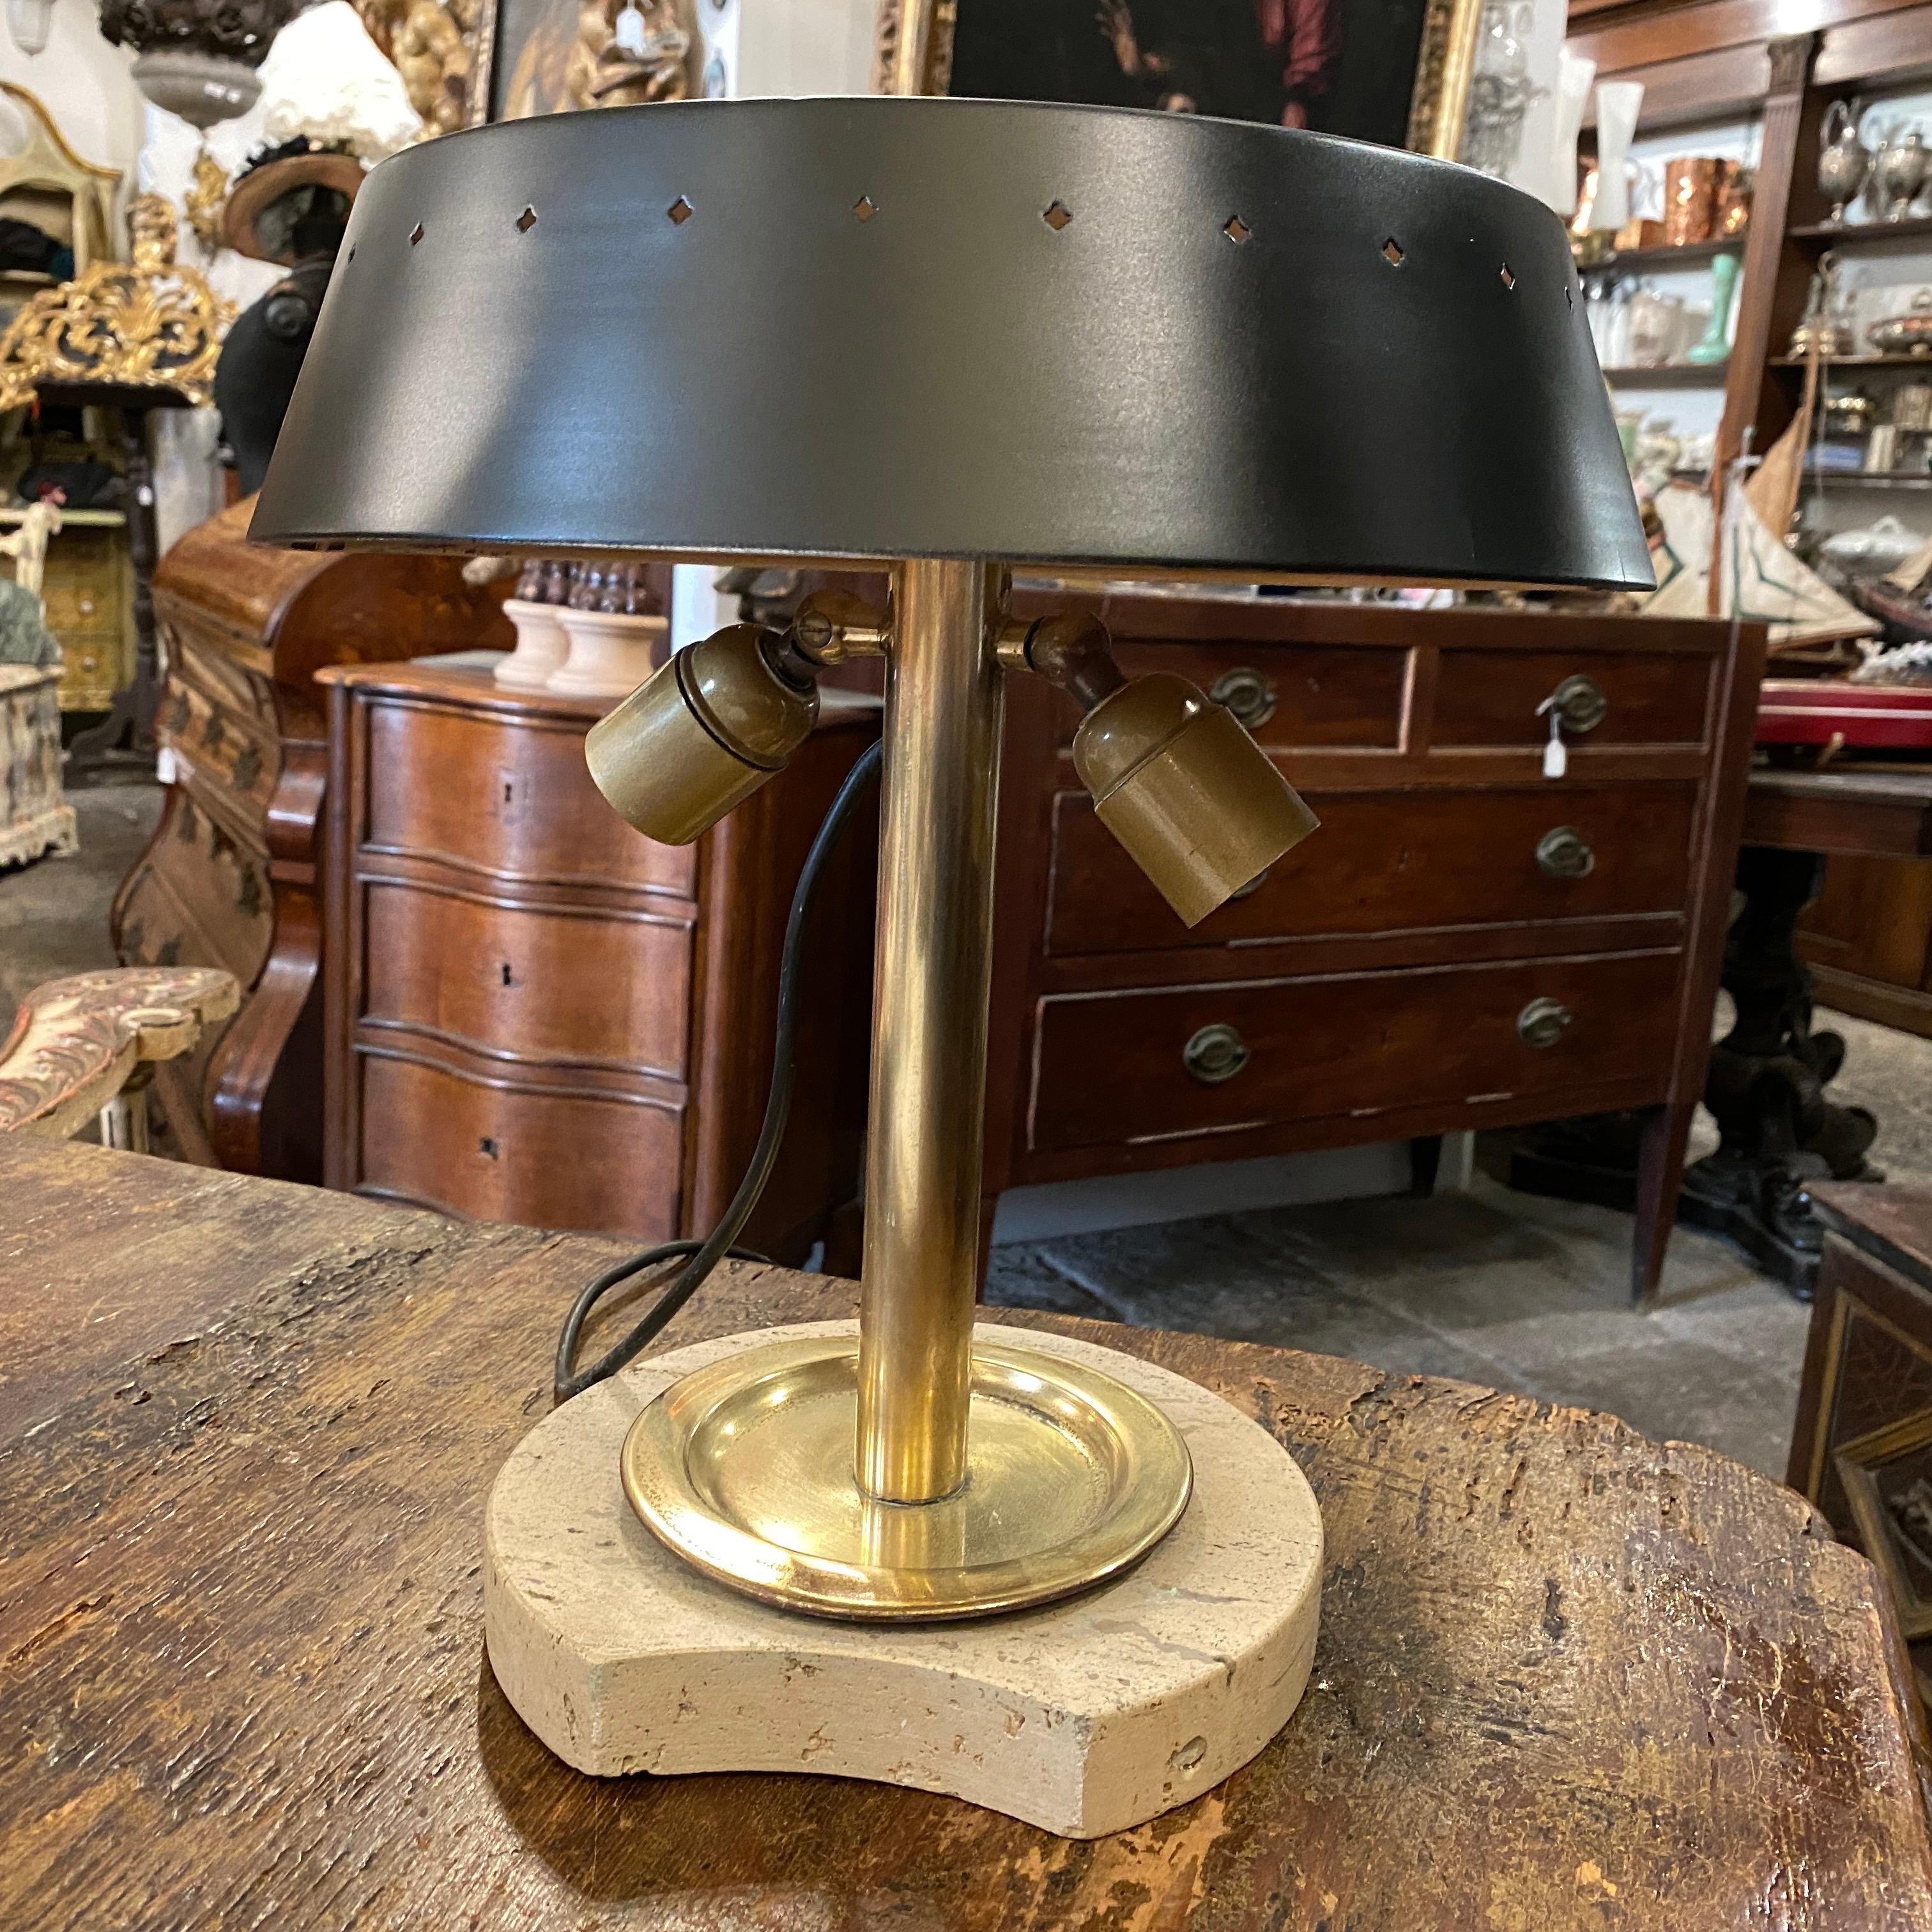 It's an high quality two lights table lamp designed and manufactured in Italy in the Sixties, it works both 110-240 volts and need two regular e27 bulbs.
This table lamp is a visually striking and sophisticated piece, blending natural materials with